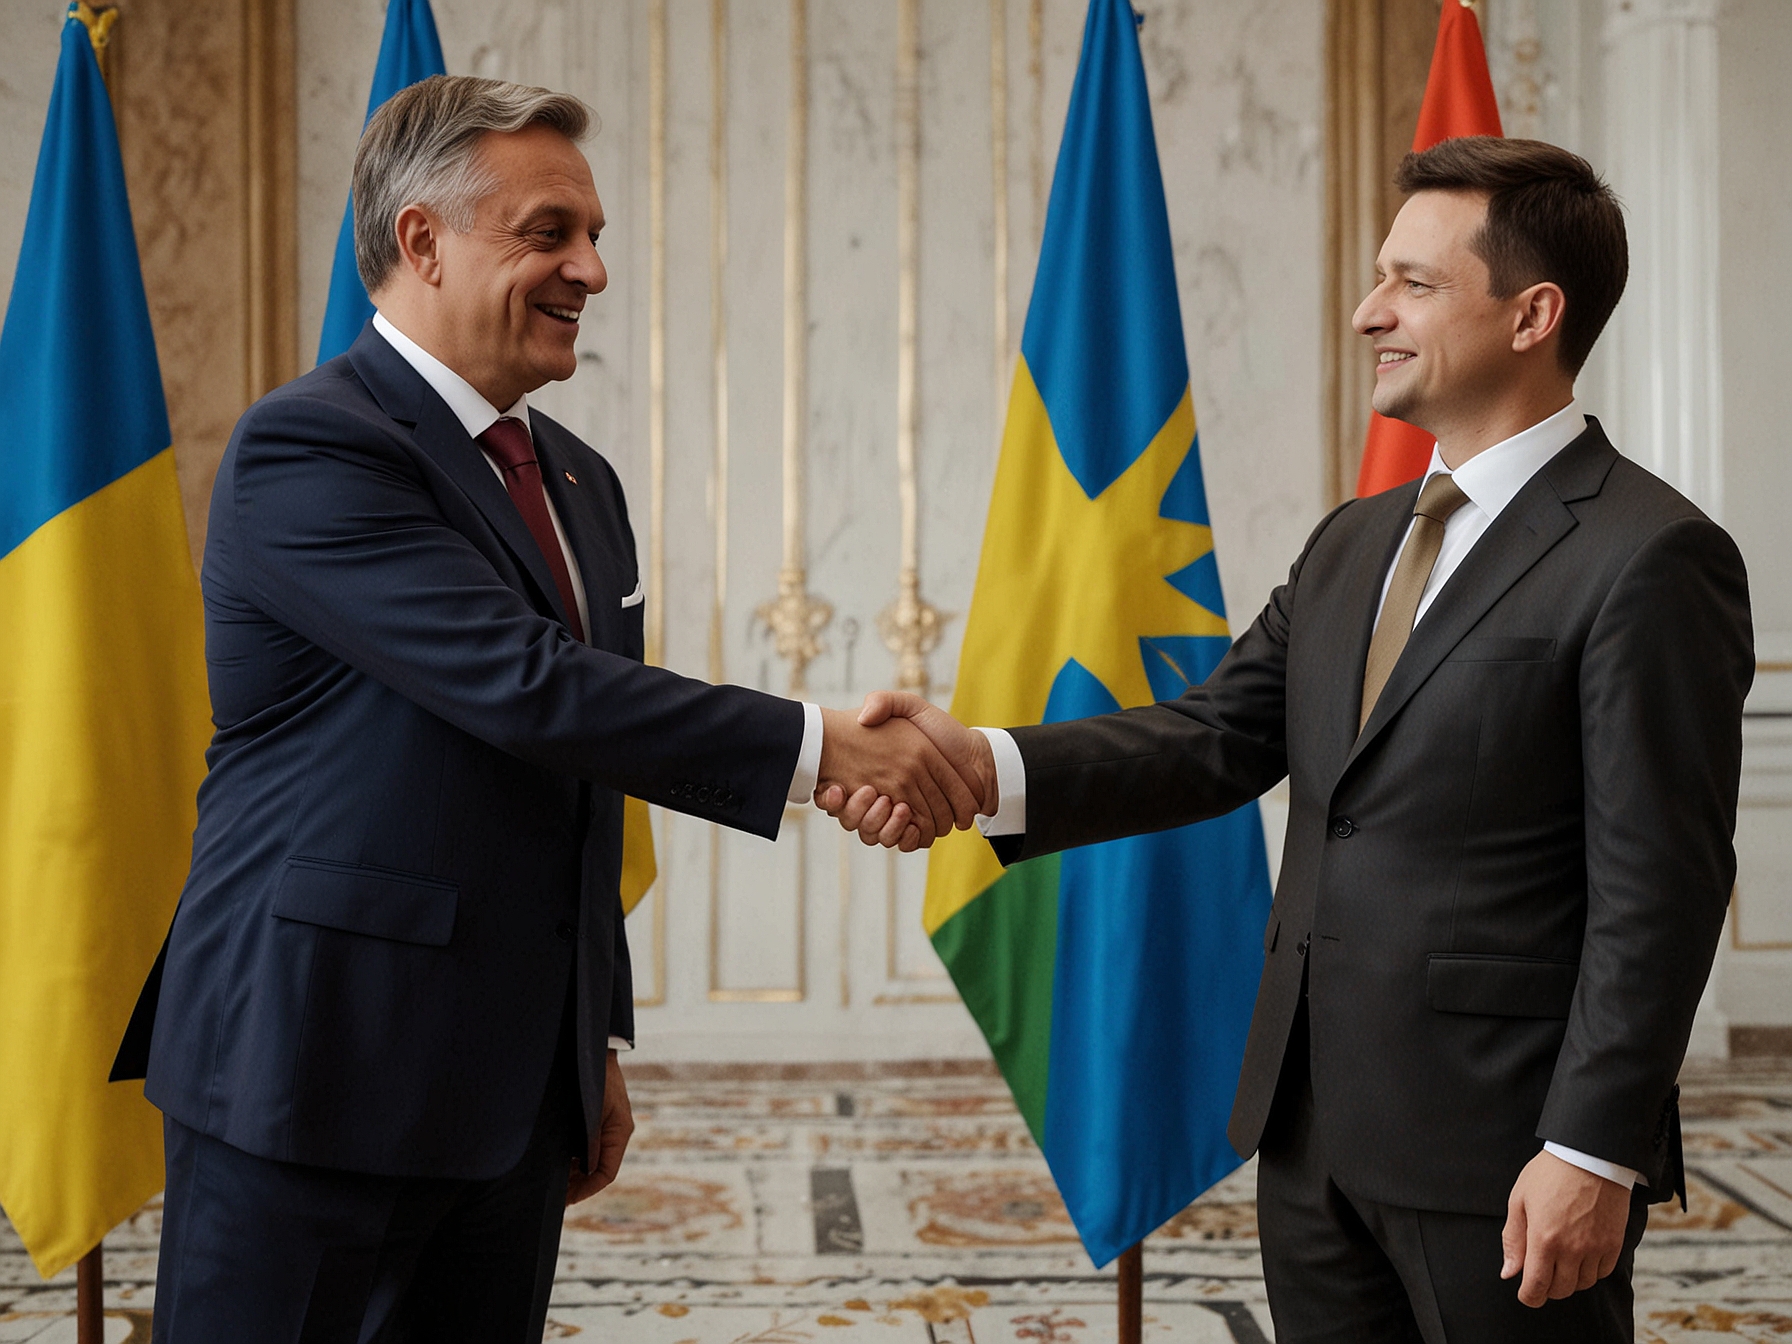 Hungarian Prime Minister Viktor Orbán and Ukrainian President Volodymyr Zelenskyy shake hands in Kyiv, symbolizing a critical diplomatic engagement amidst the ongoing conflict with Russia.